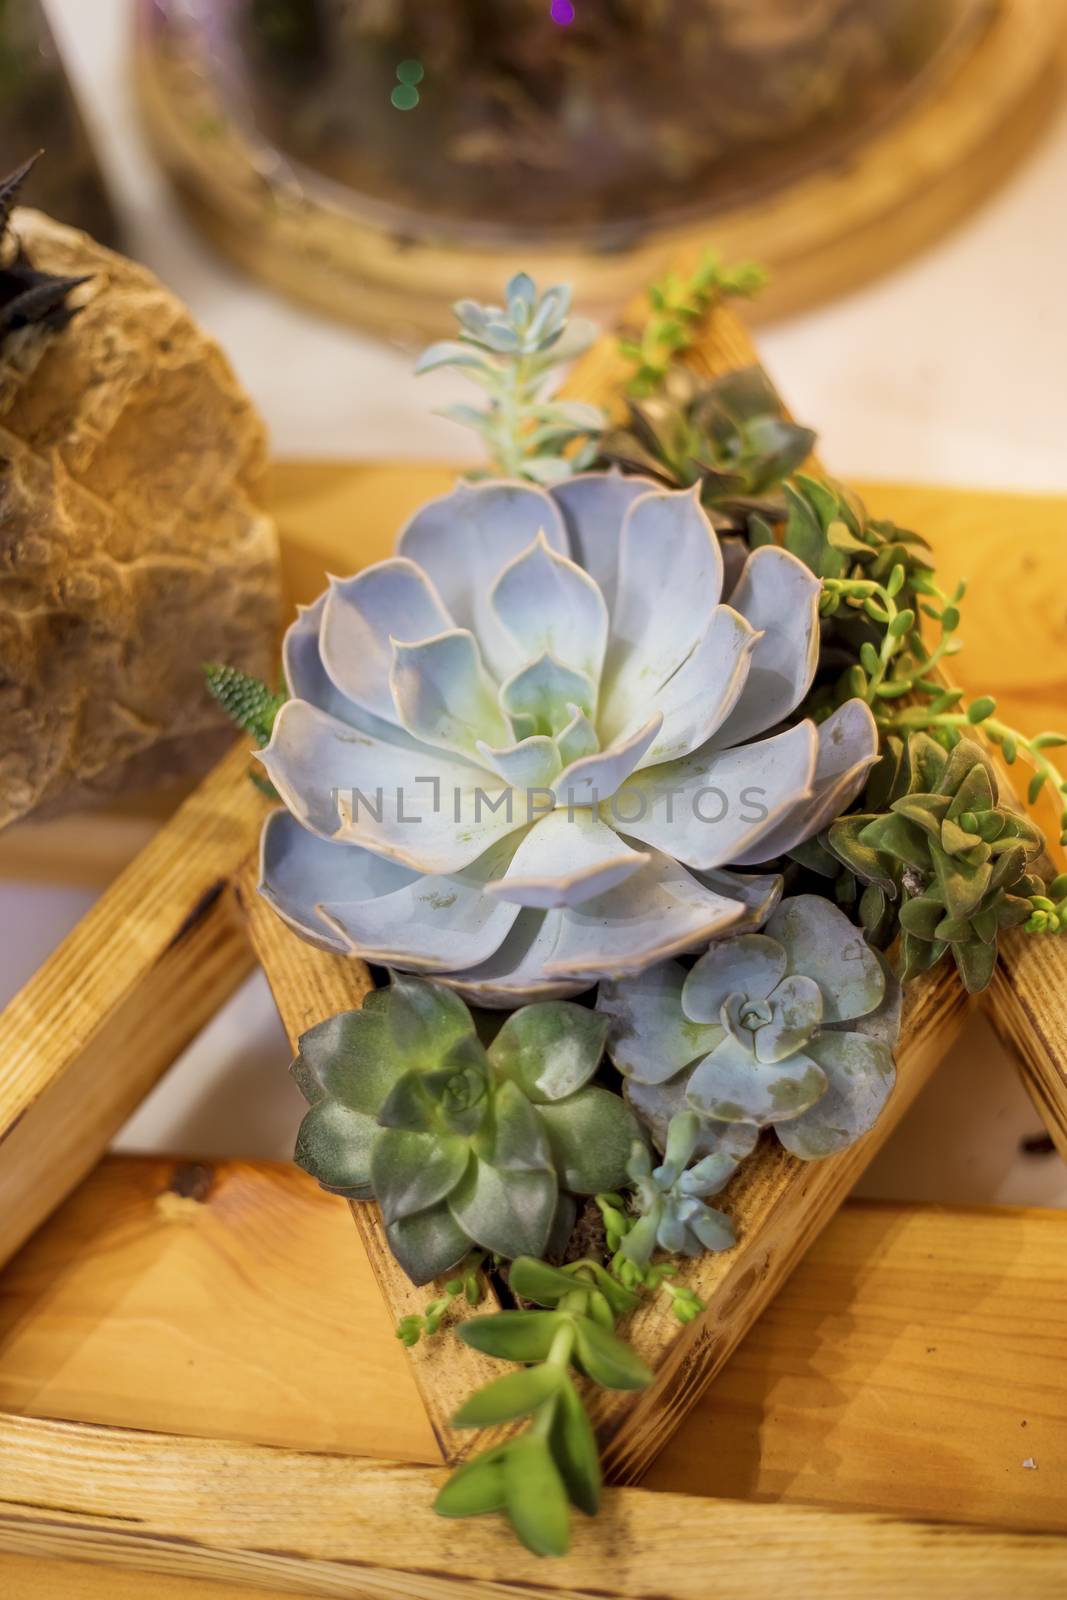 Decorative floristic composition of a variety of succulents in a wooden box pot, the idea of decorating the space of an apartment or cafe. soft selective focus.